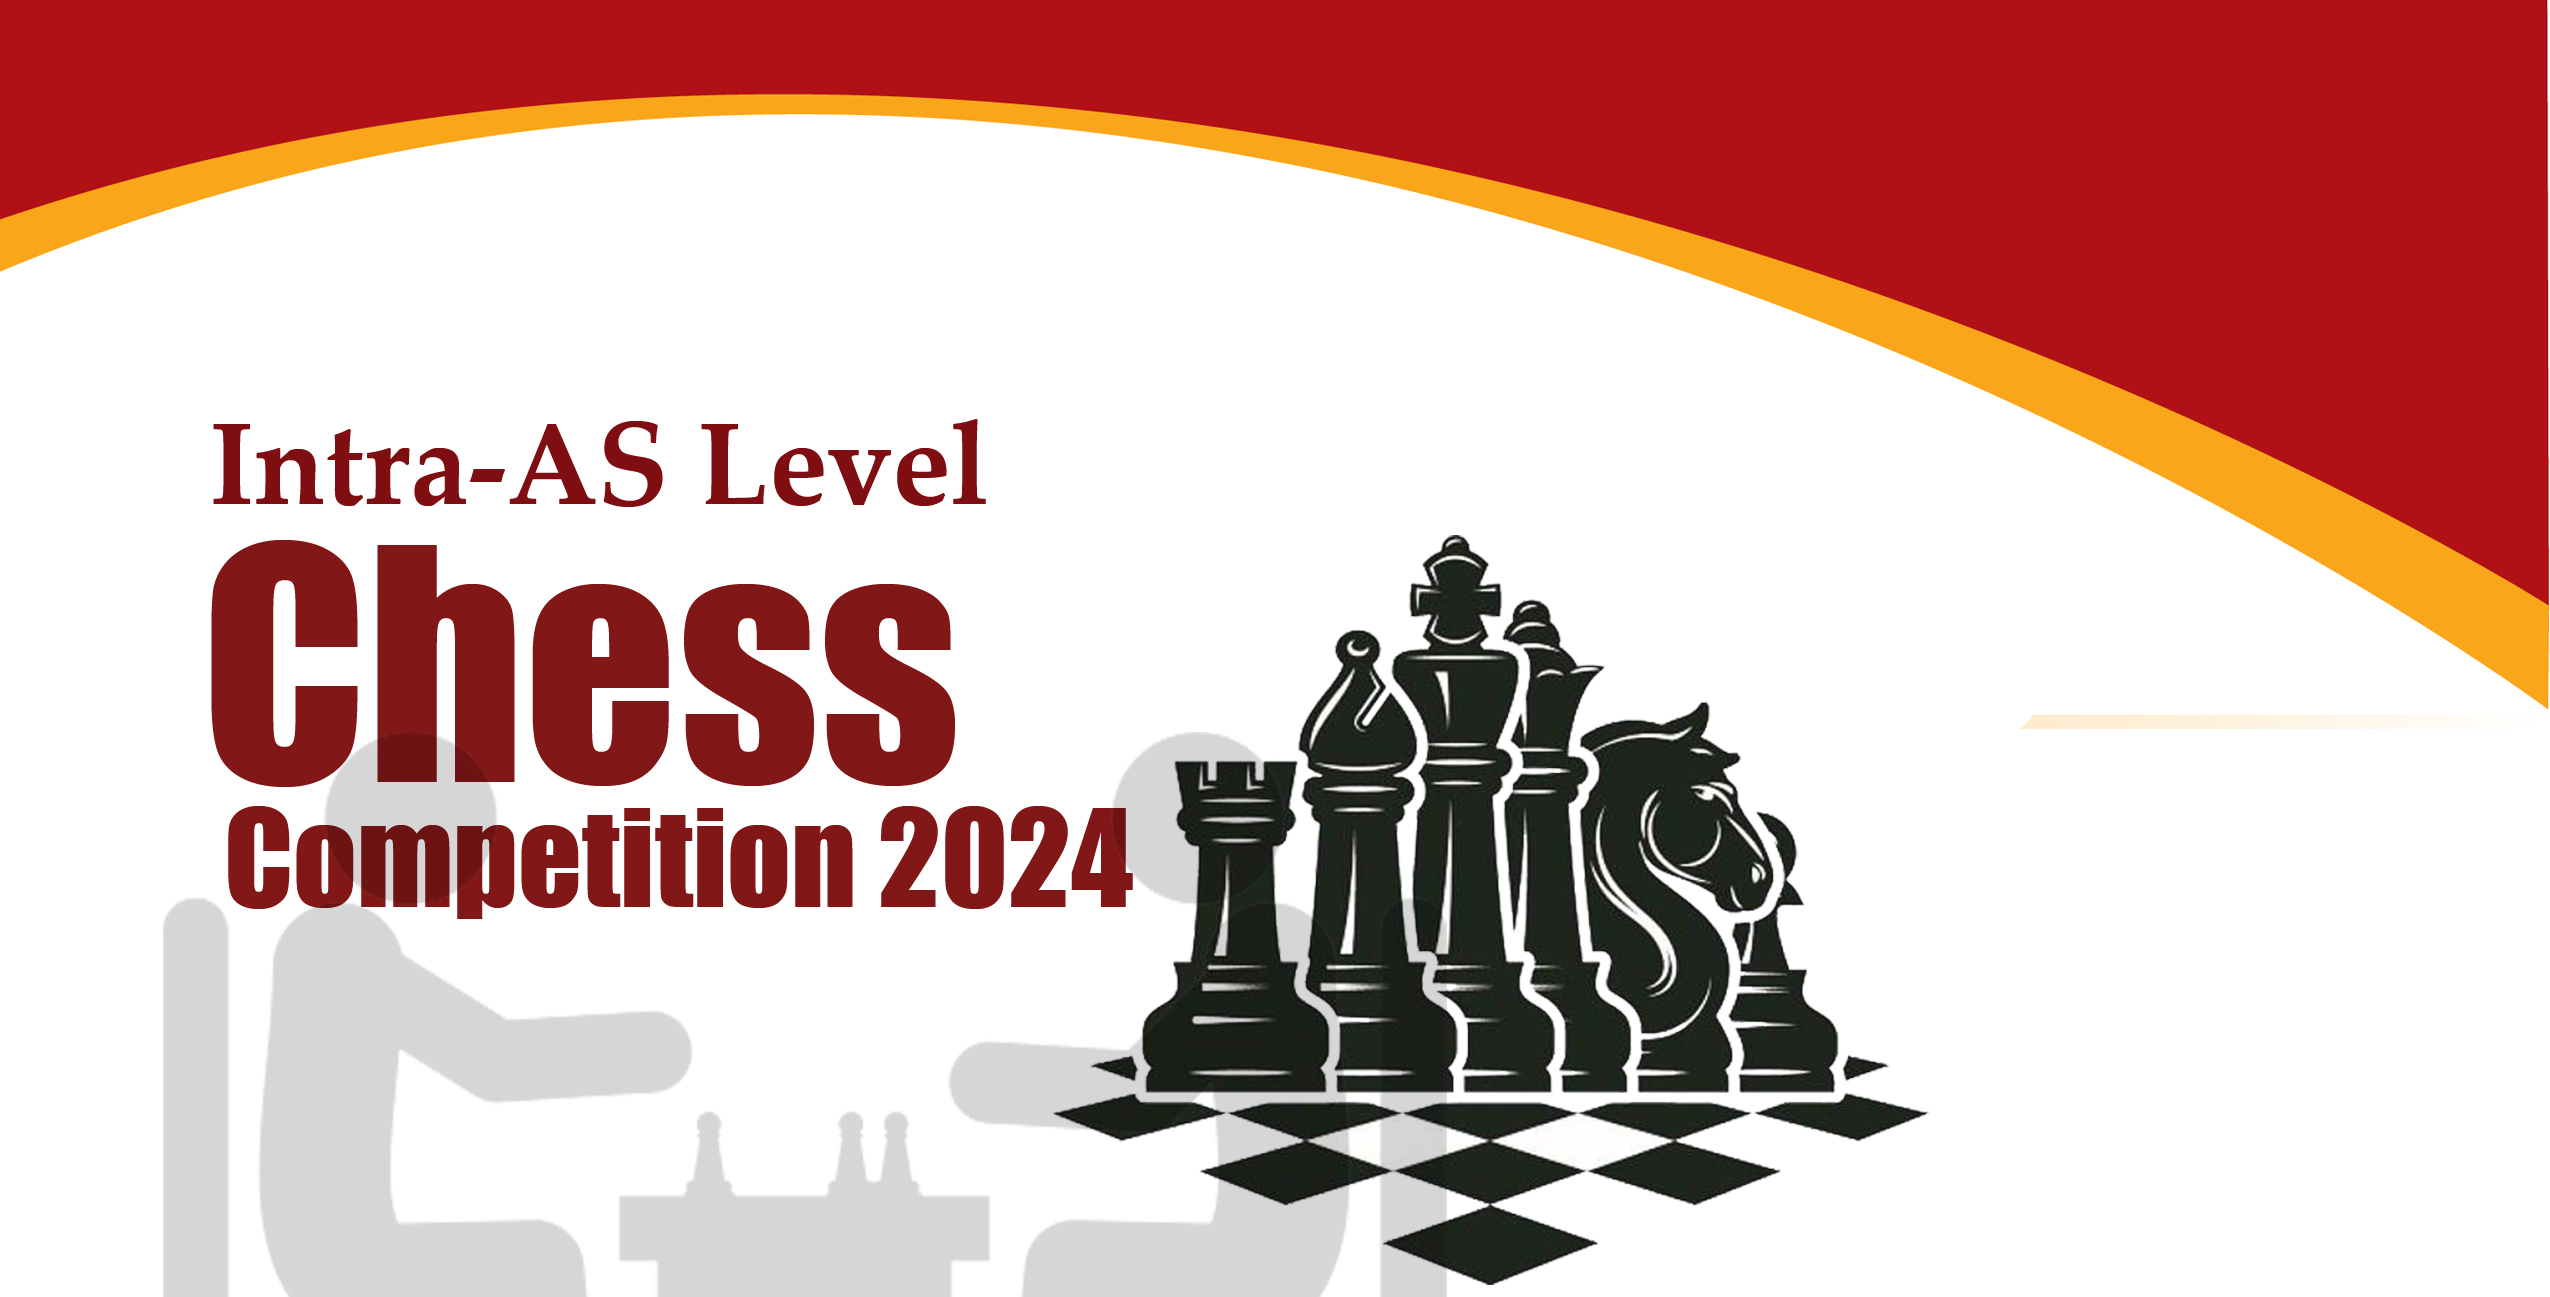 Intra-AS Level Chess Competition 2024